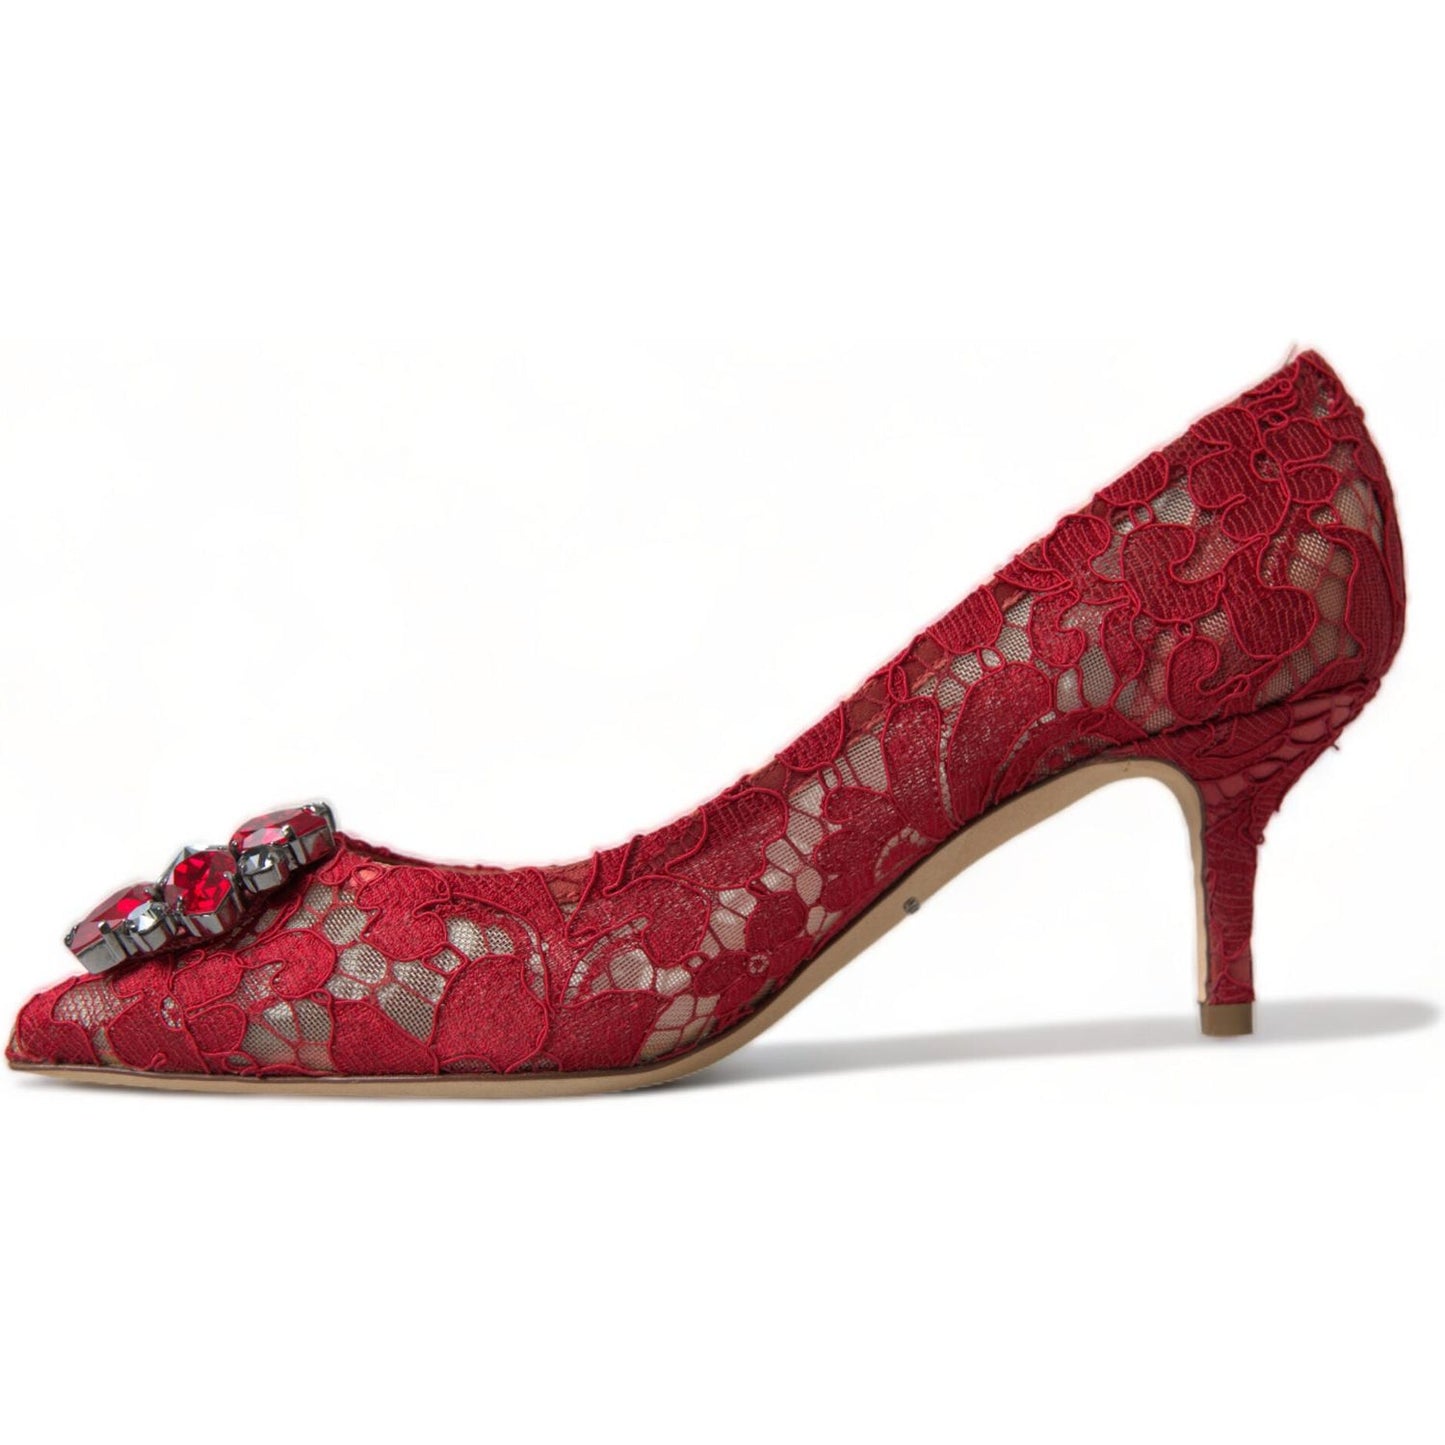 Dolce & Gabbana Radiant Red Lace Heels with Crystals red-taormina-lace-crystal-heels-pumps-shoes-2